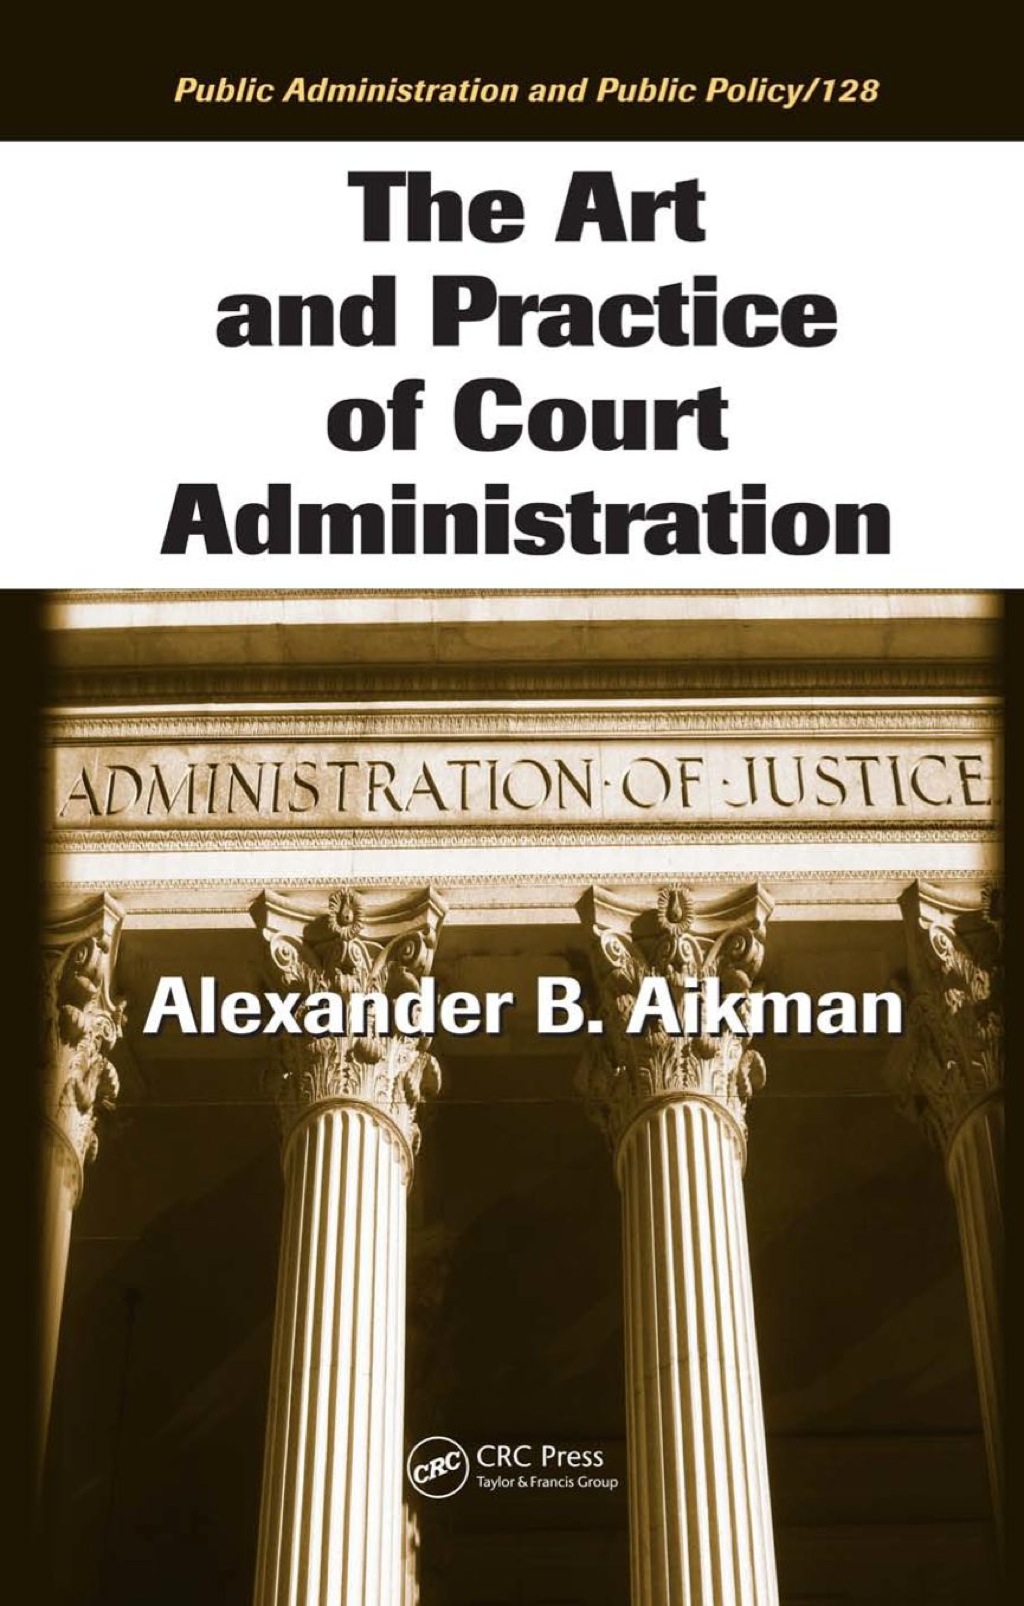 The Art and Practice of Court Administration (eBook) - Alexander B. Aikman